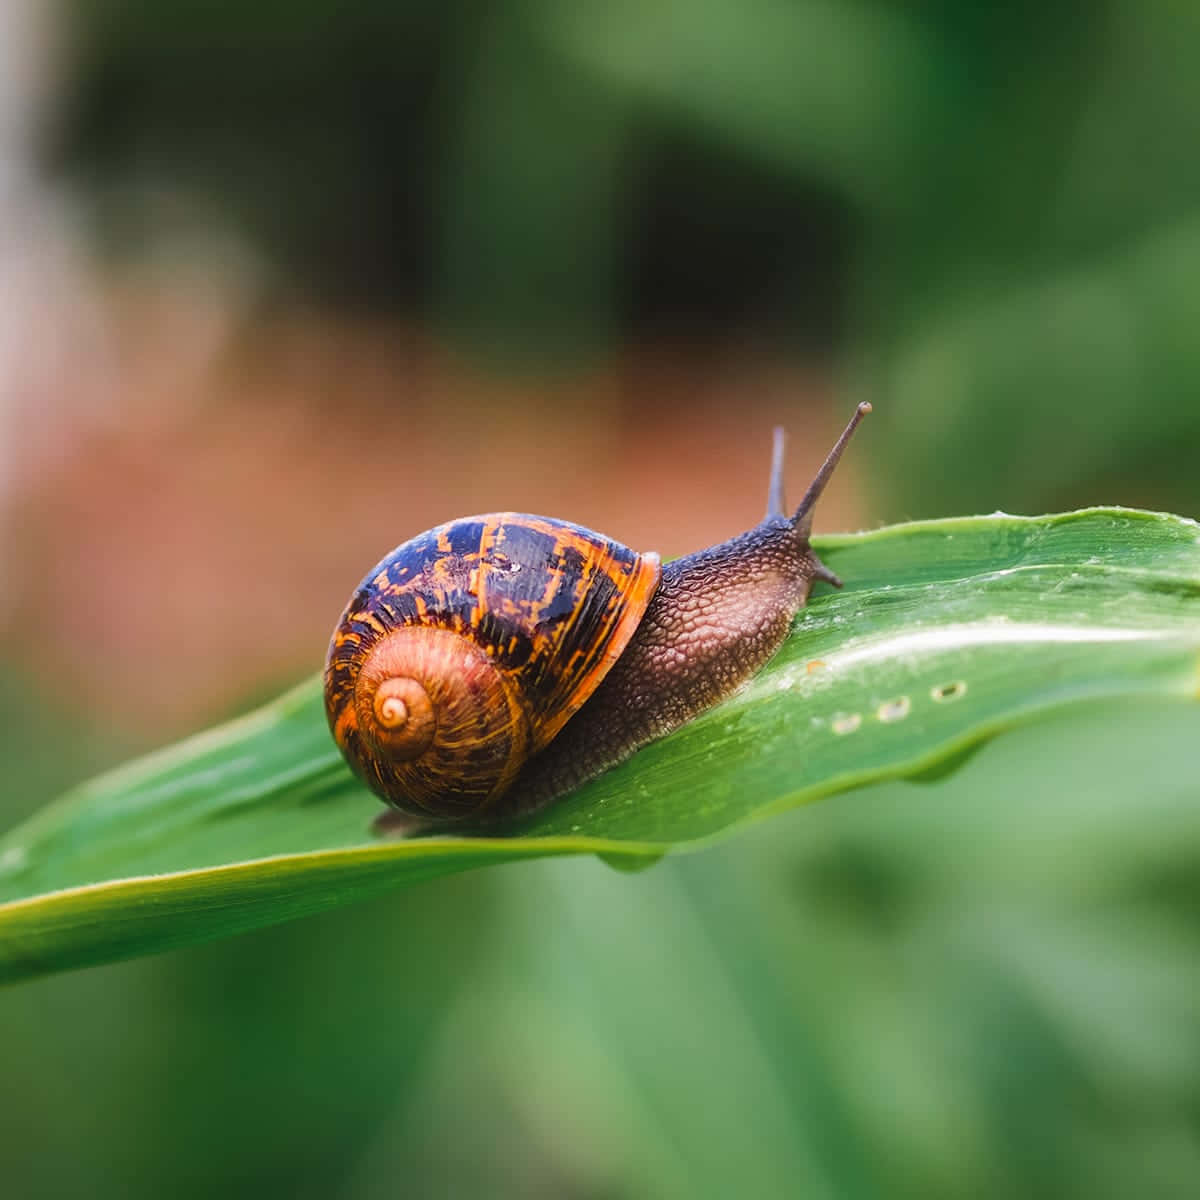 Watch out as this snail glides across its journey